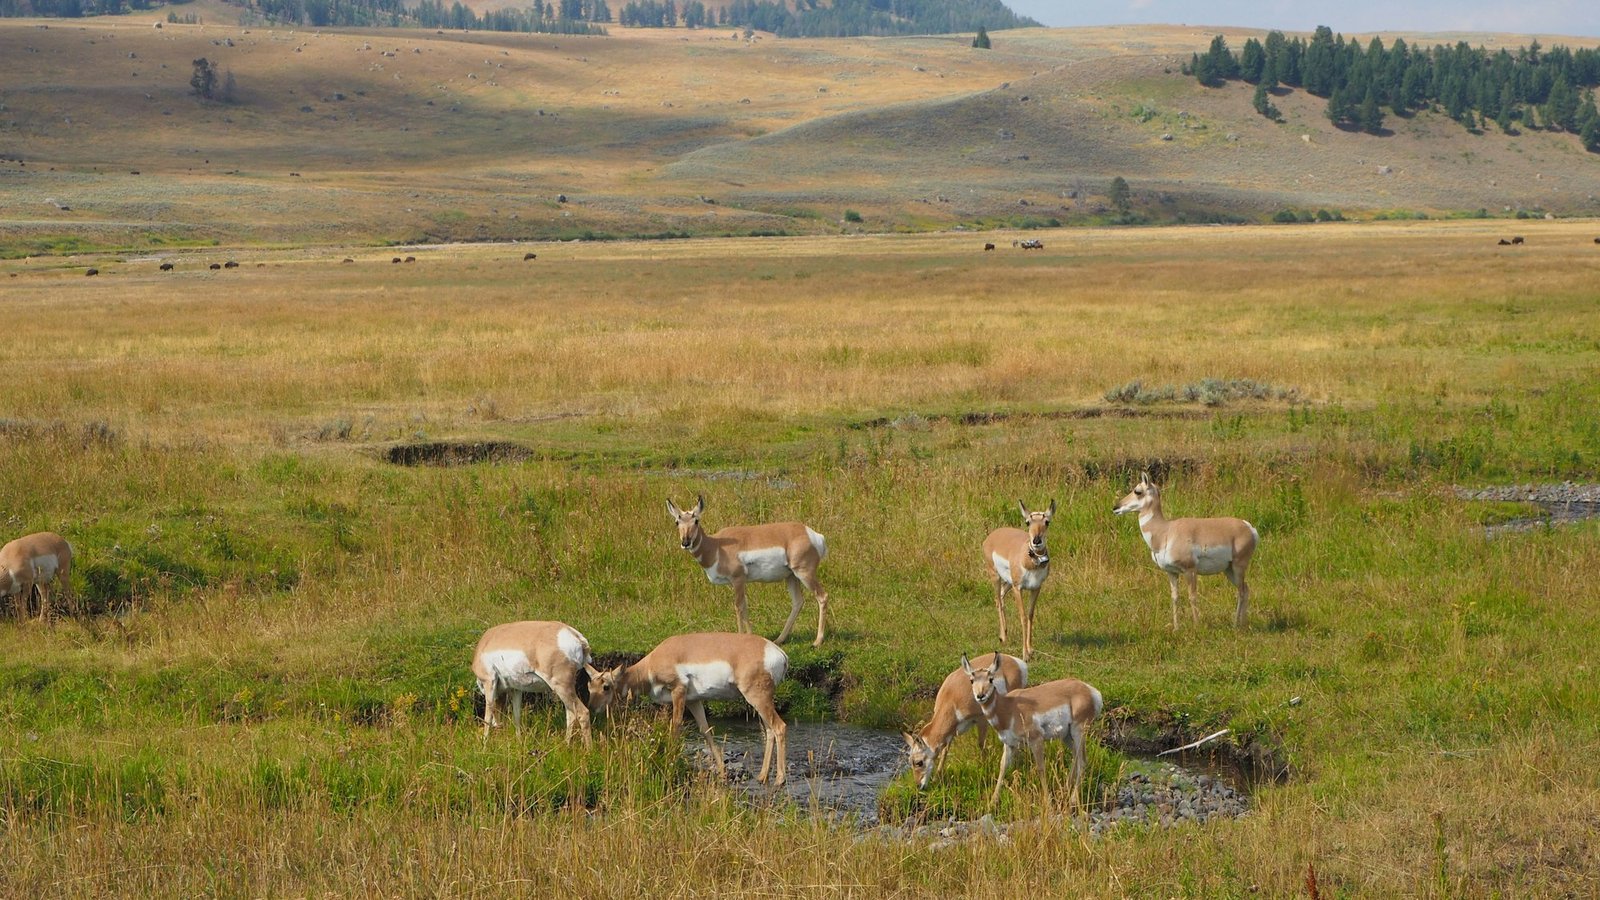 Antelopes on the field in Yellowstone National Park